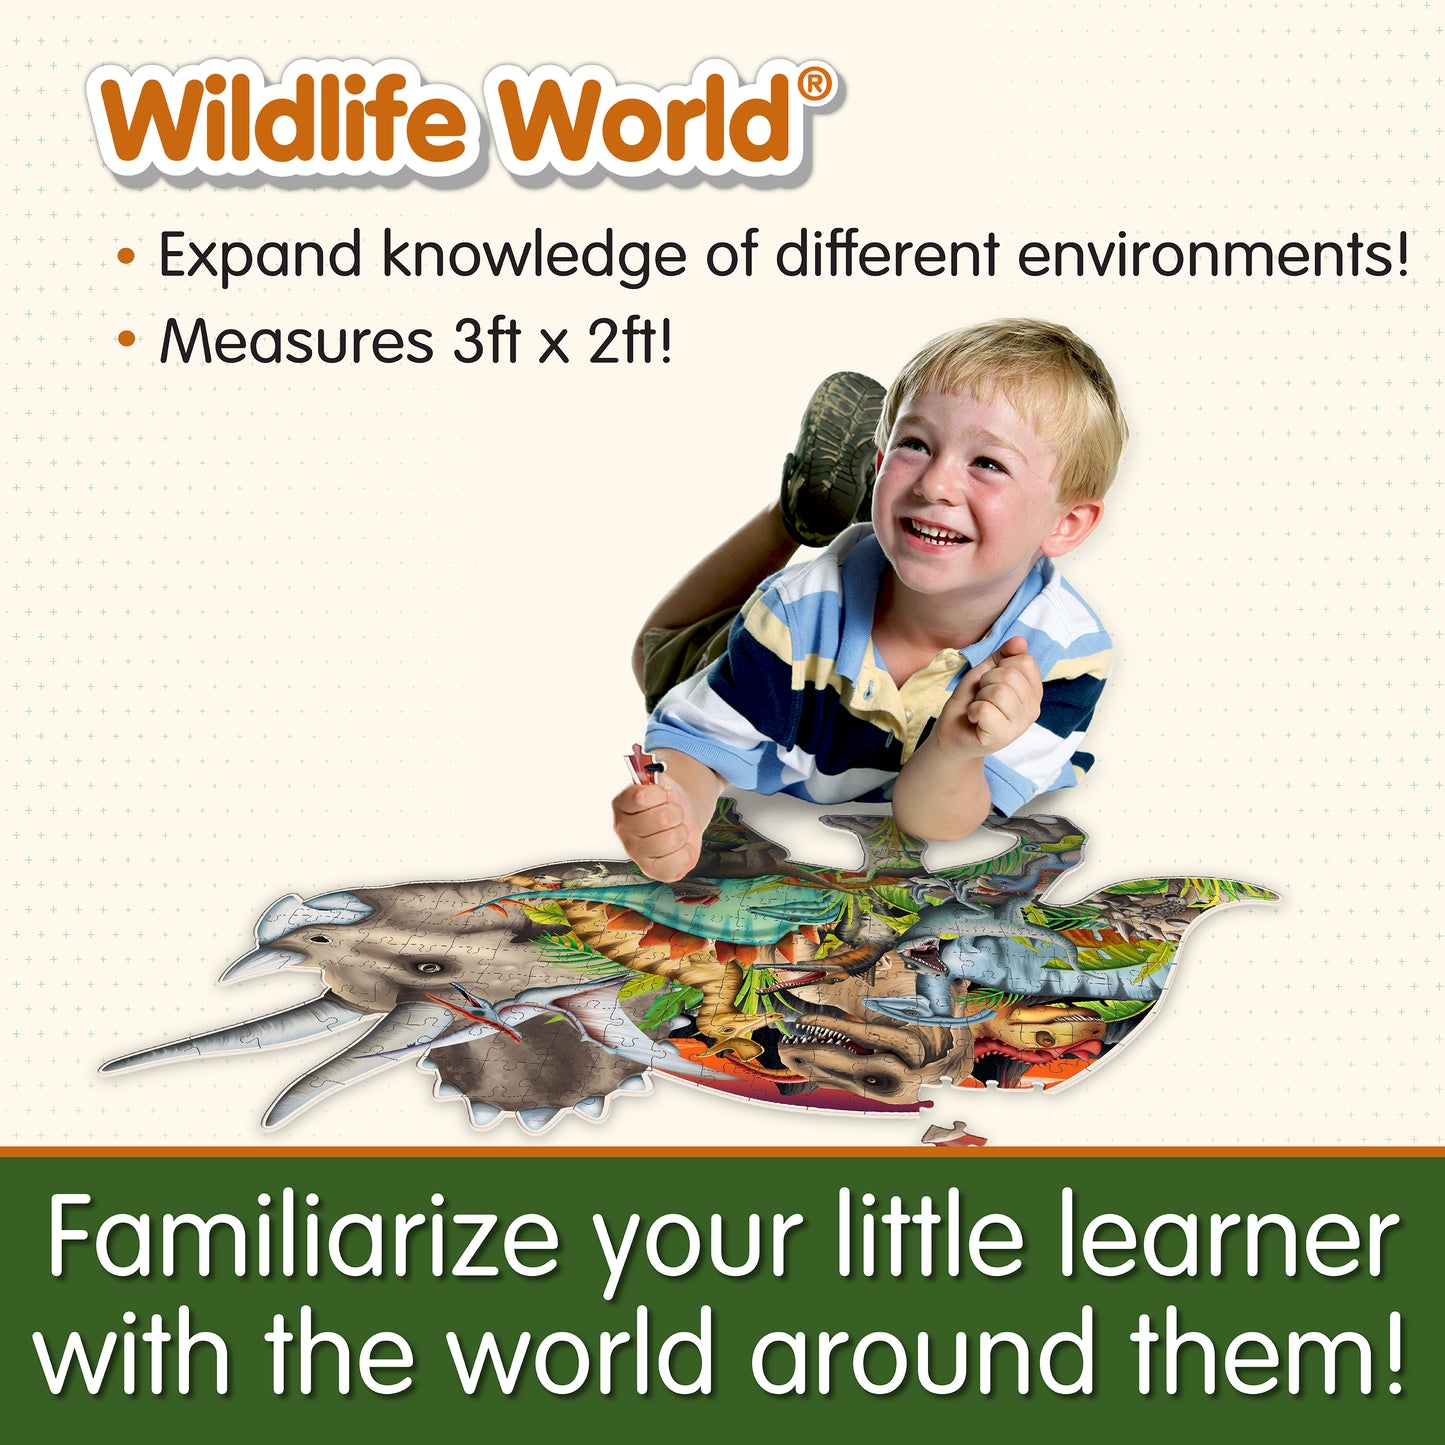 Infographic about Wildlife World Dinosaur Puzzle that says, "Familiar your little learner with the world around them!"